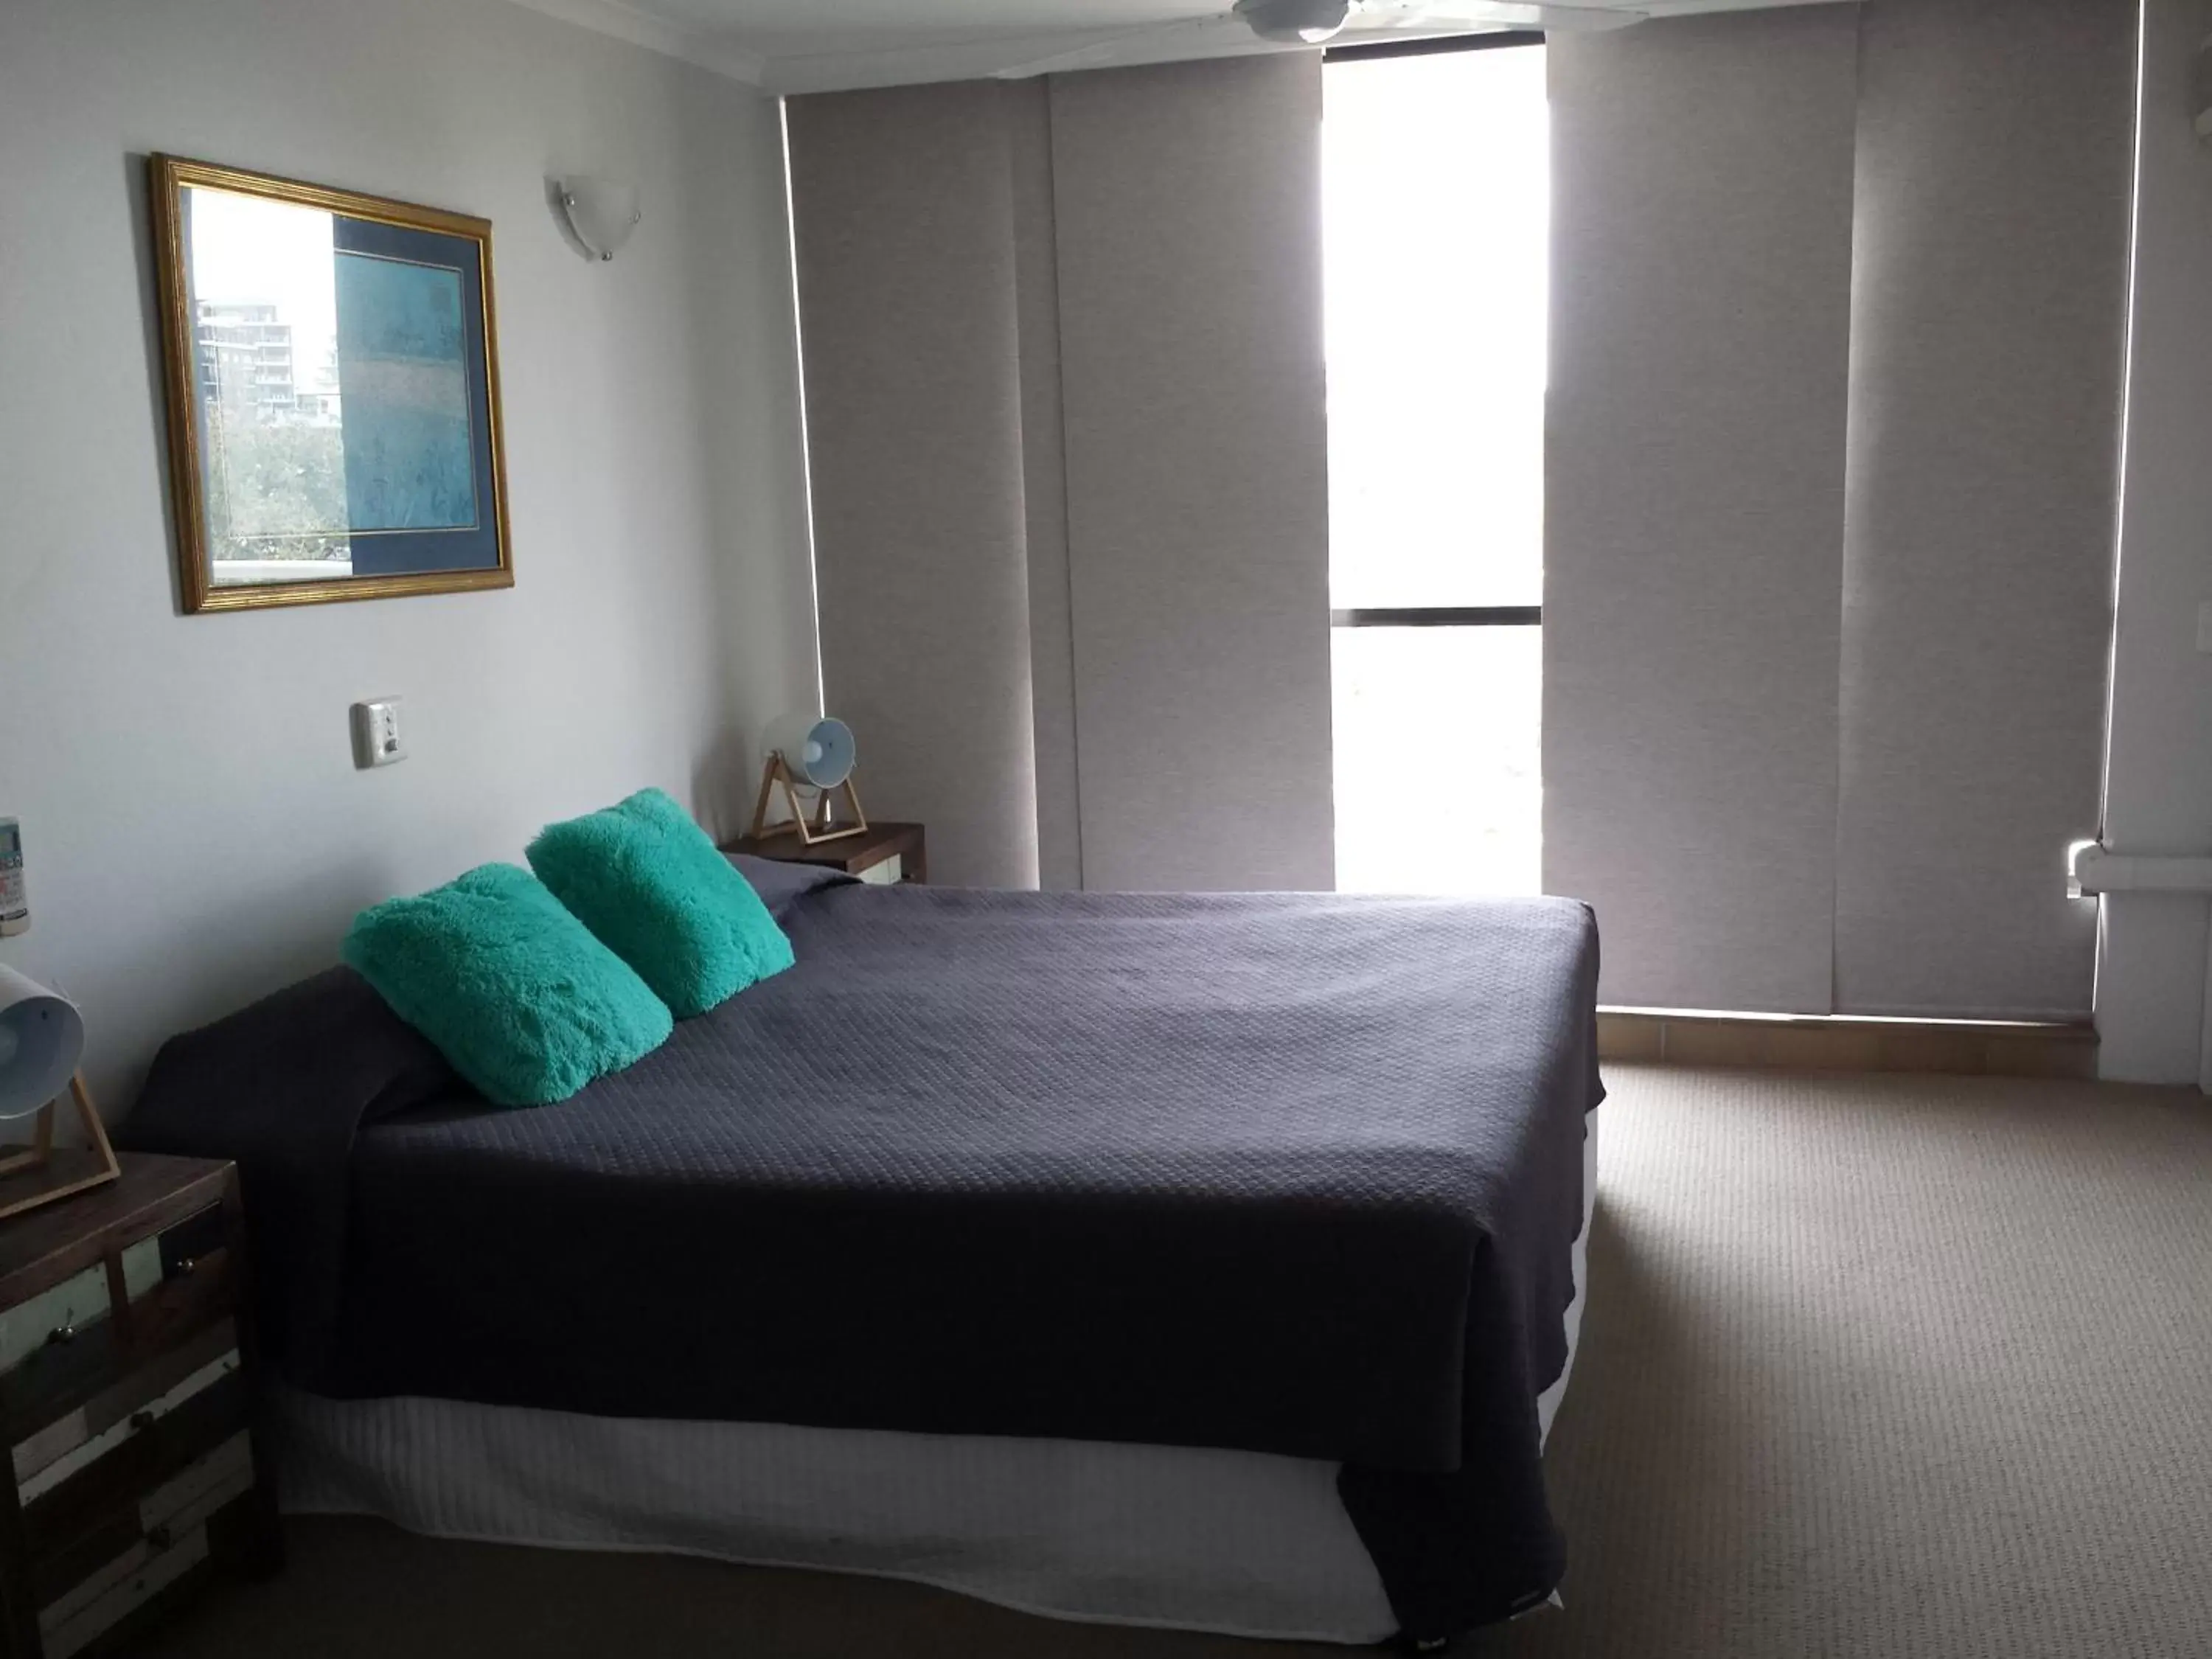 Bed, Room Photo in Kirribilli Apartments